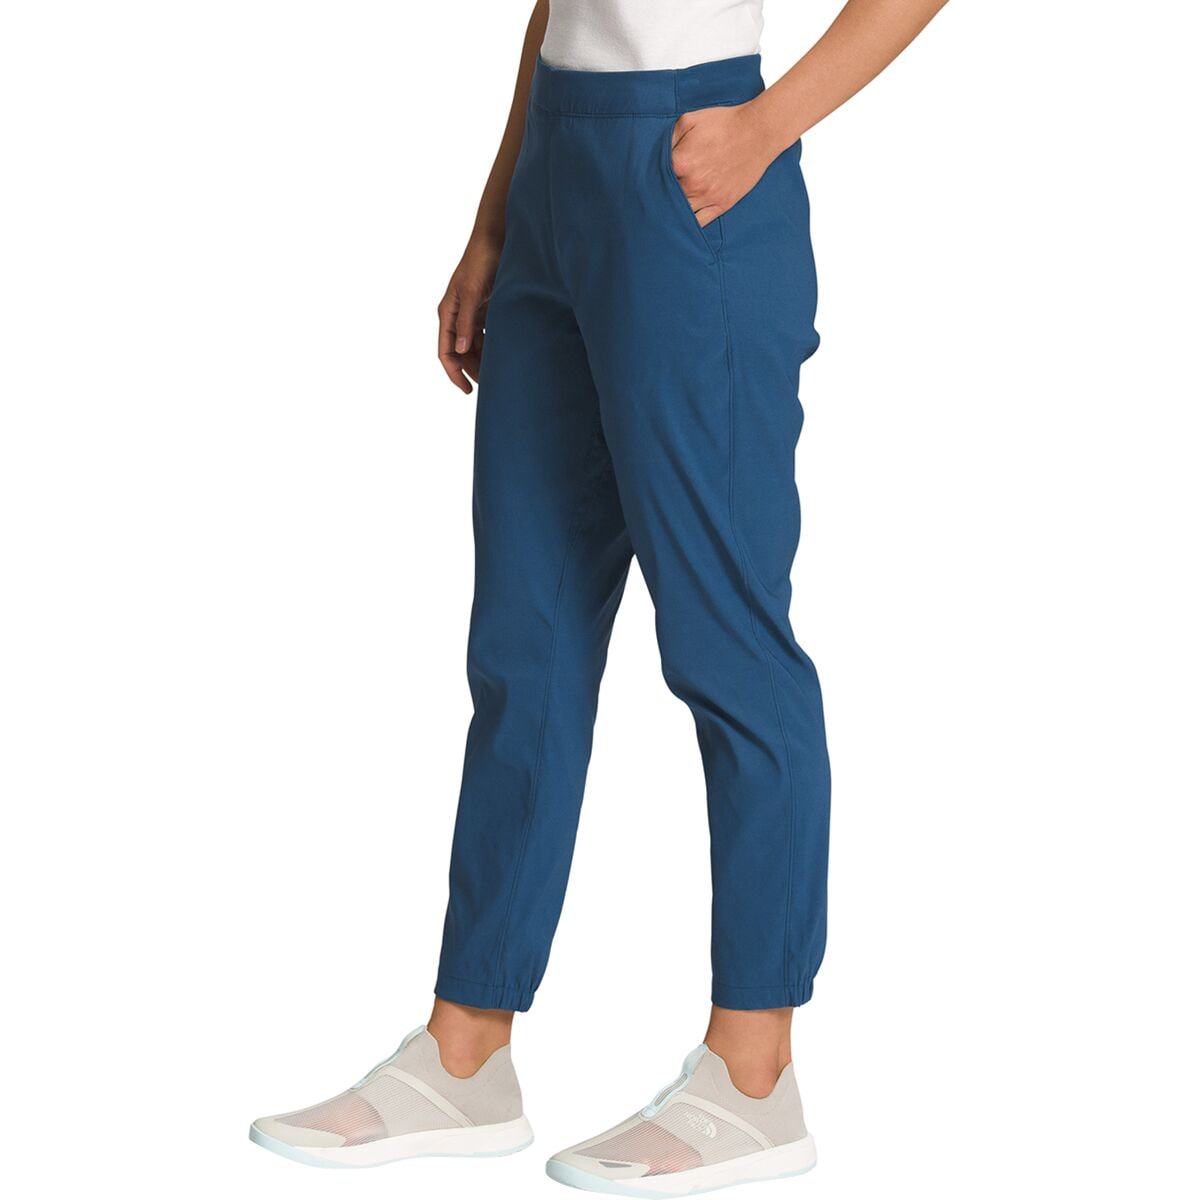 The North Face Class V Ankle Pant - Women's - Clothing